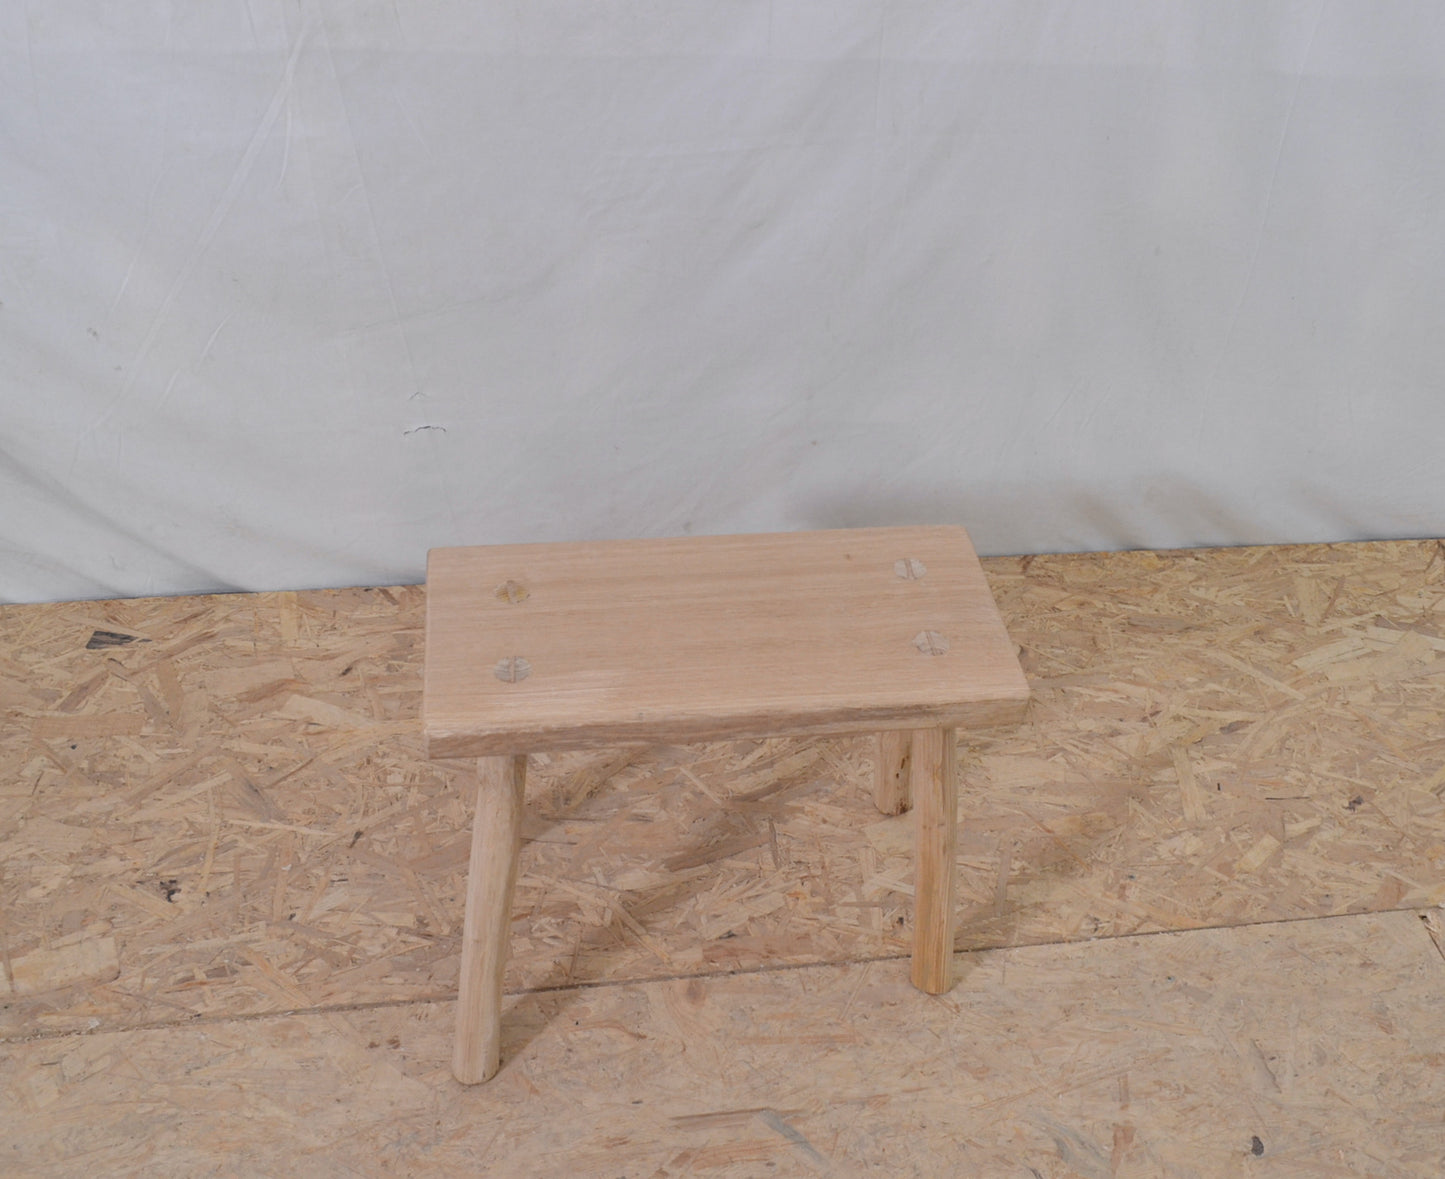 Rustic wooden stool, solid oak, end of sofa, plant holder